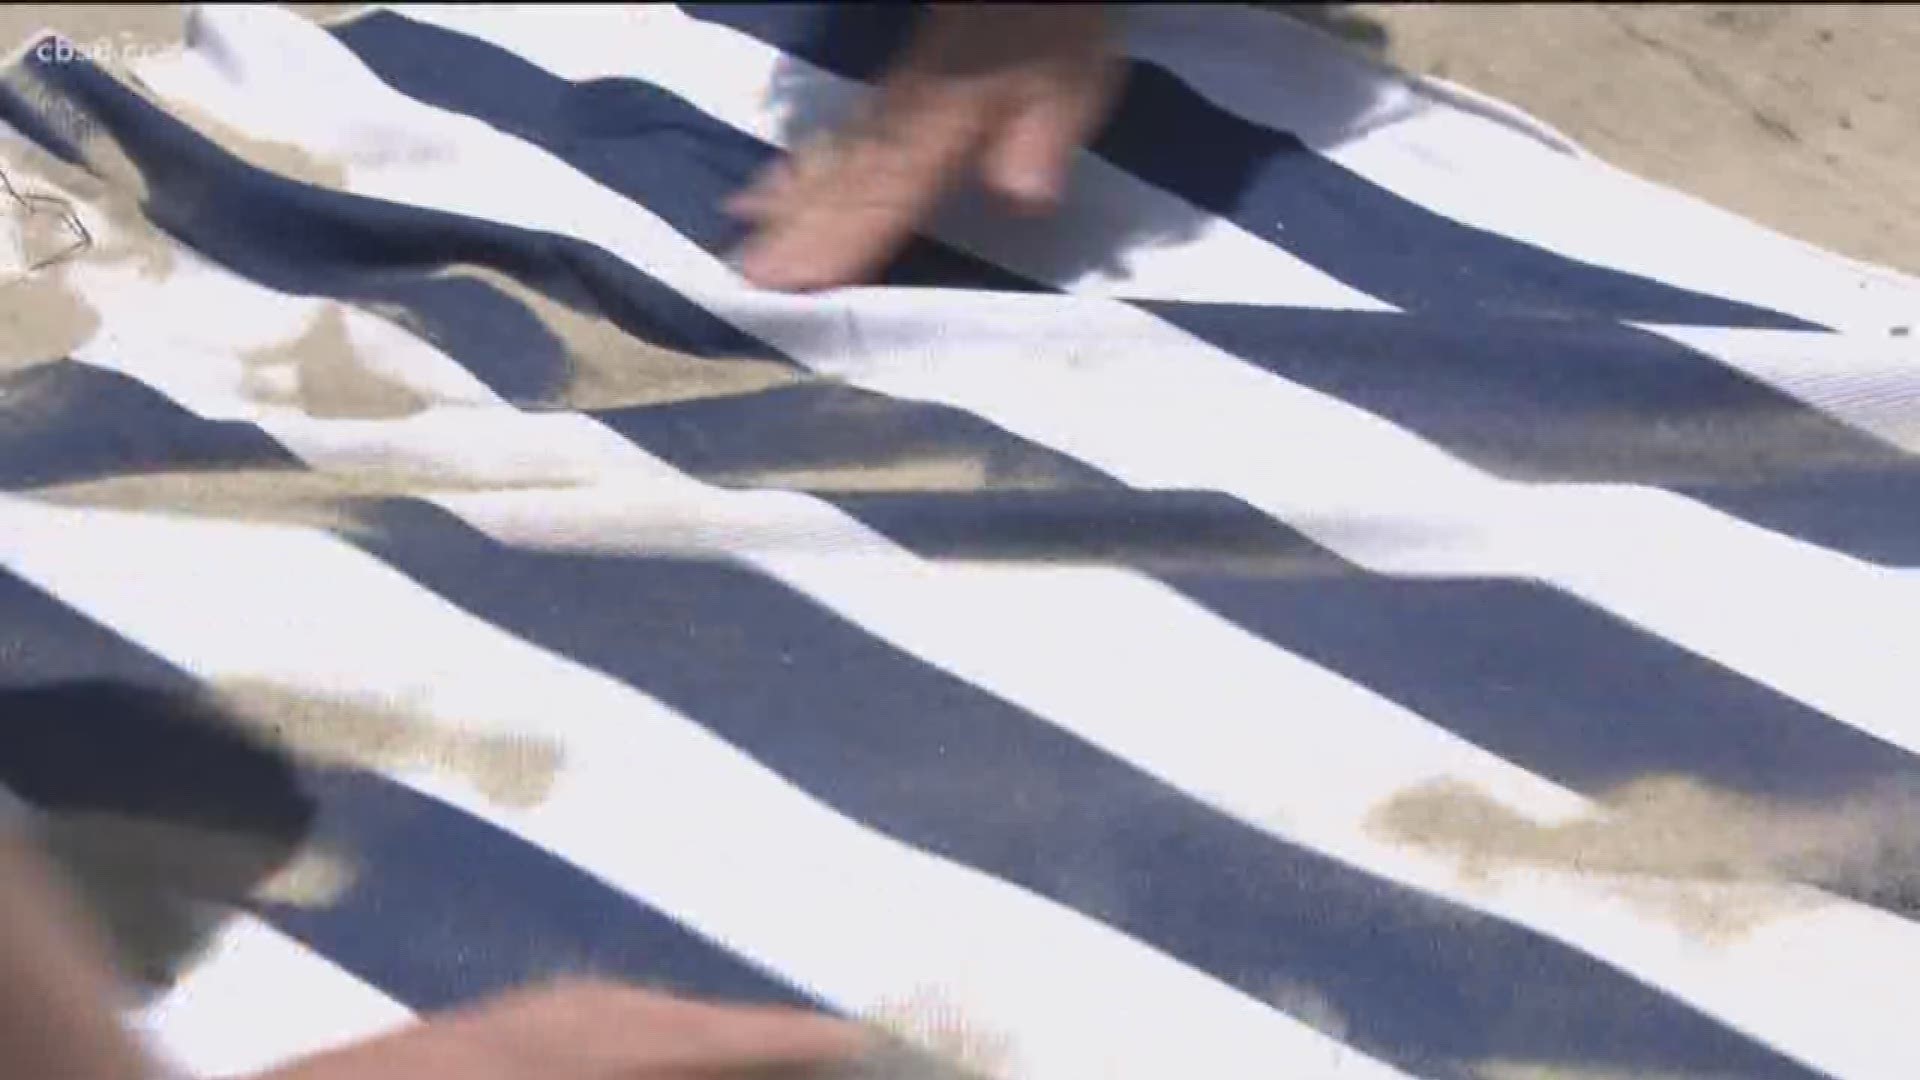 If you think a sand-free beach towel is too good to be true, you're not alone. In Monday's Zevely Zone, Jeff went to Oceanside to draw a line in the sand and see if the claims made by CGear Sand-Free Towels were true.